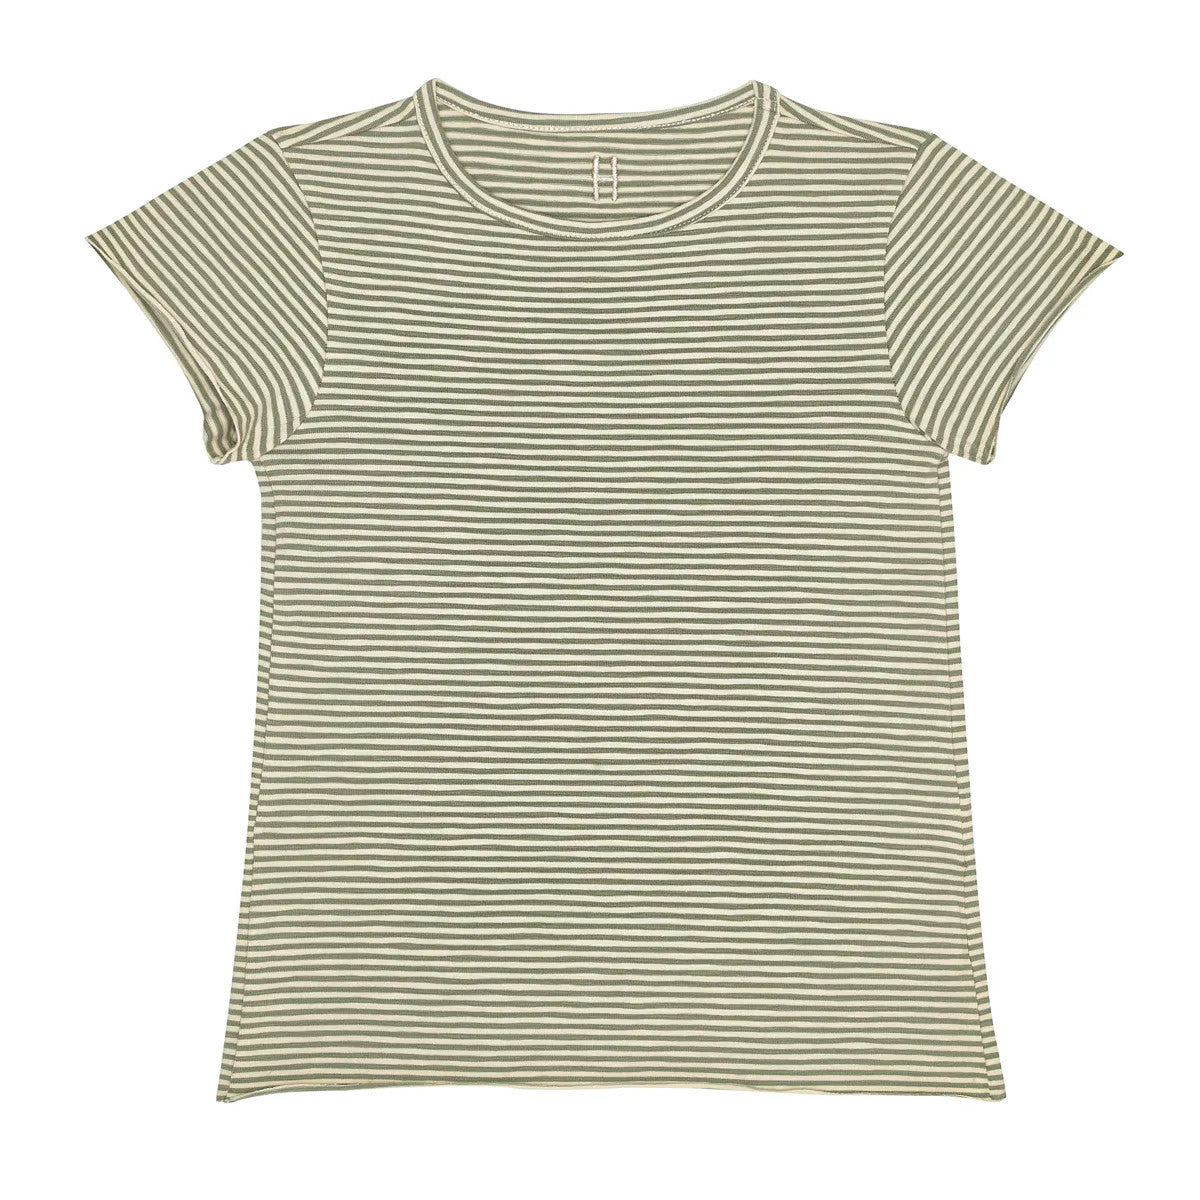 Little Hedonist unisex organic cotton t-shirt in beige and green stripes